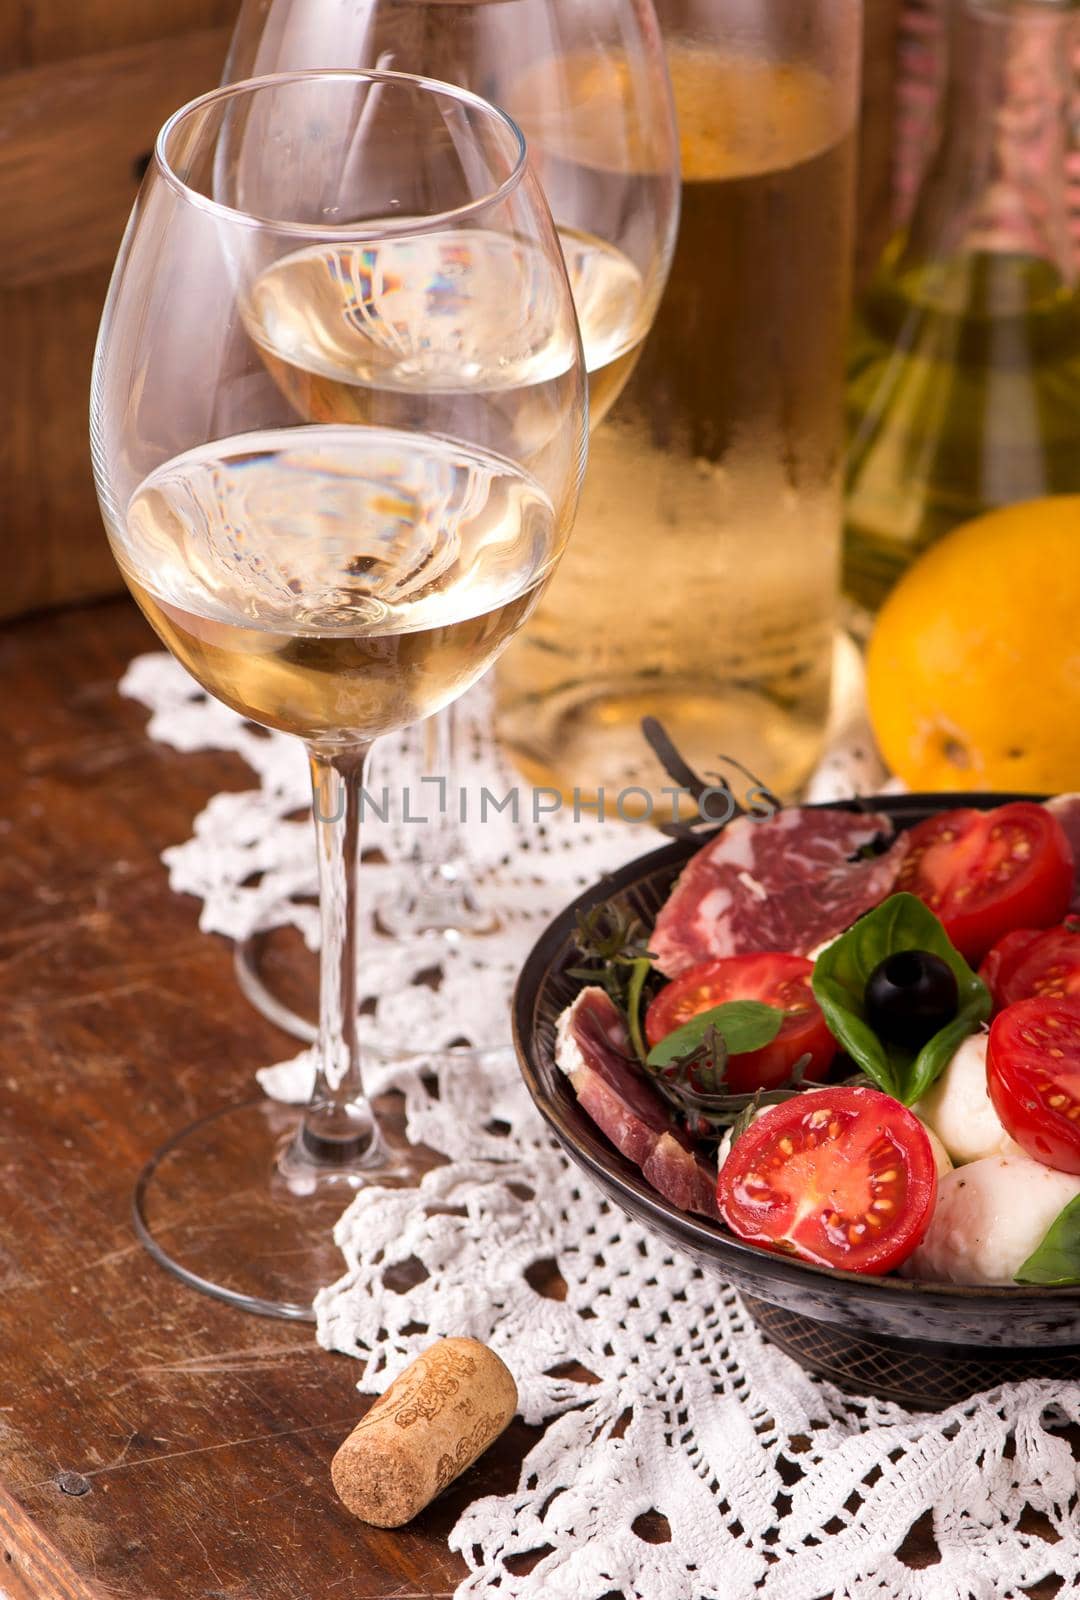 Wine and tomatoes with basil in vintage setting on wooden table